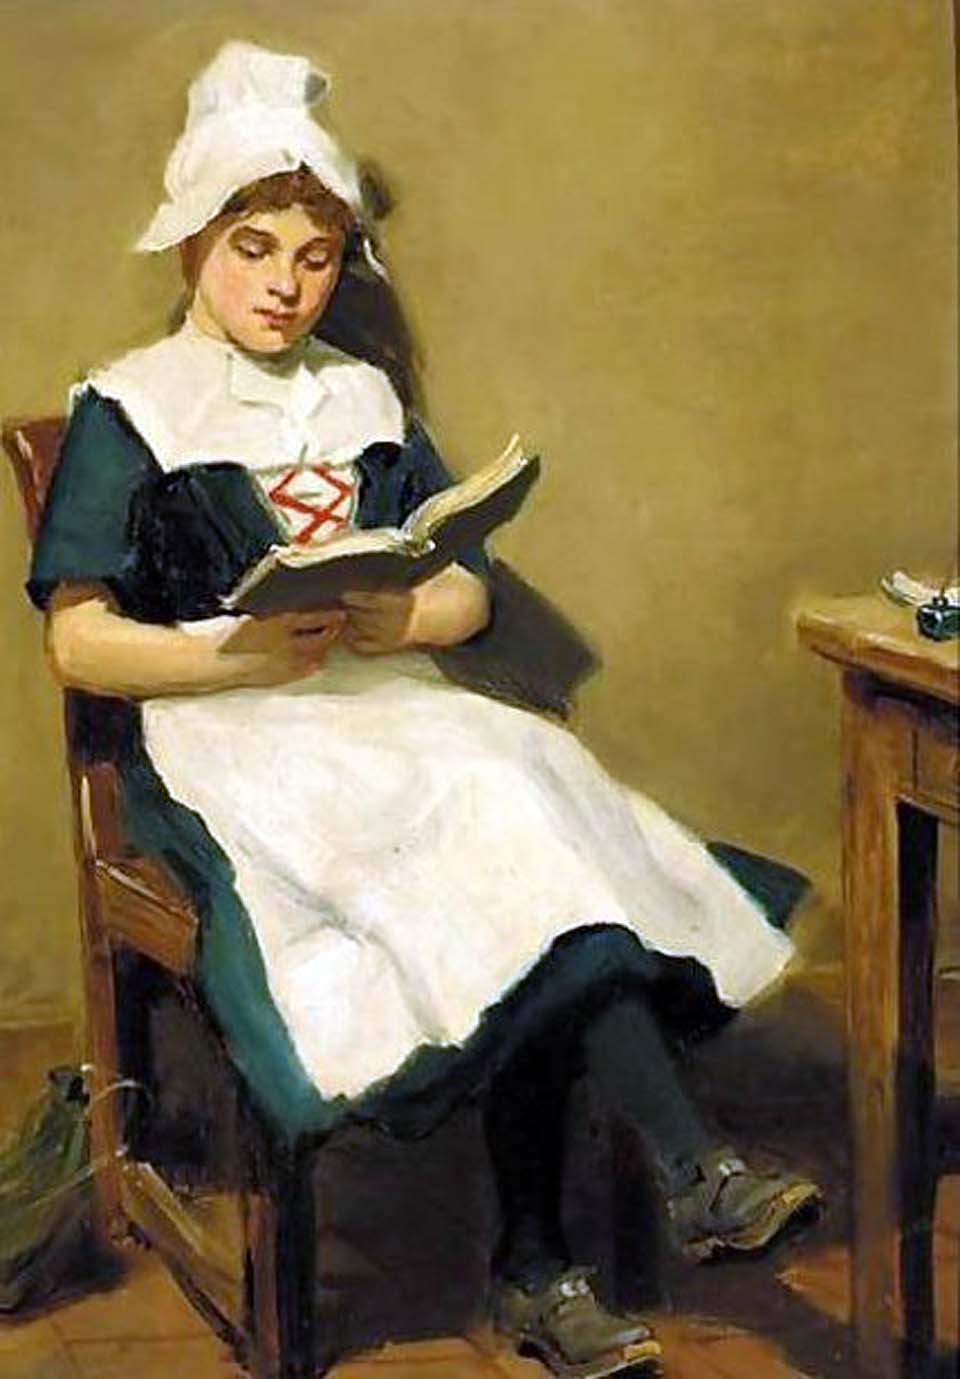 The country school girl